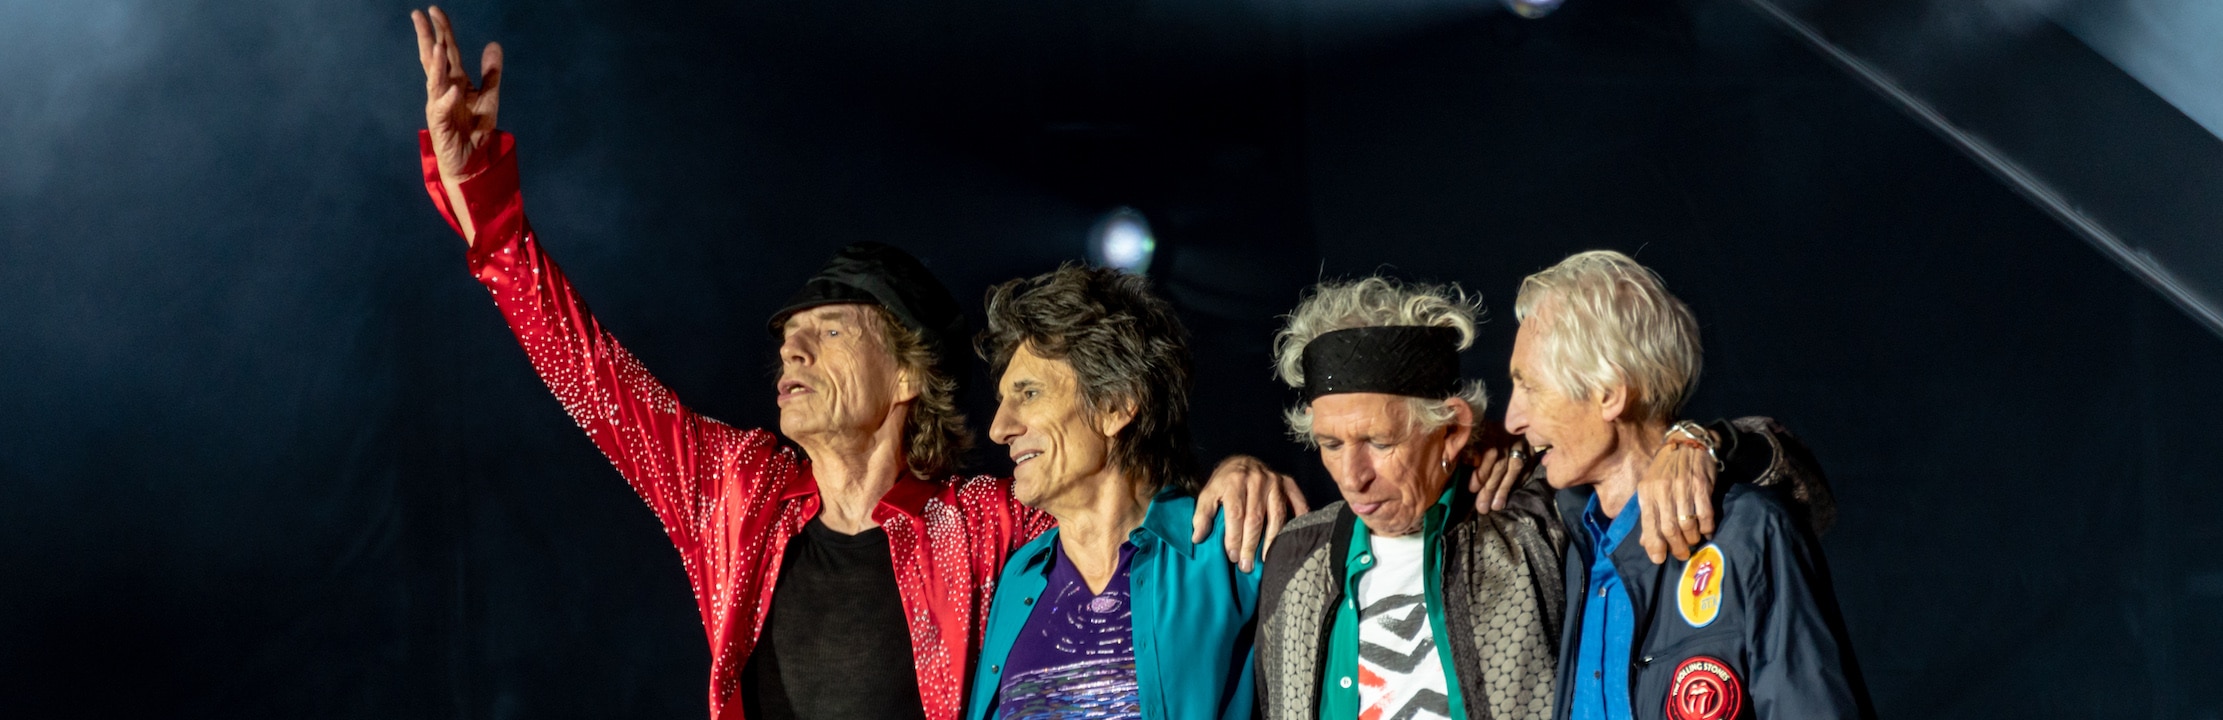 Rolling Stones post show bow 2018